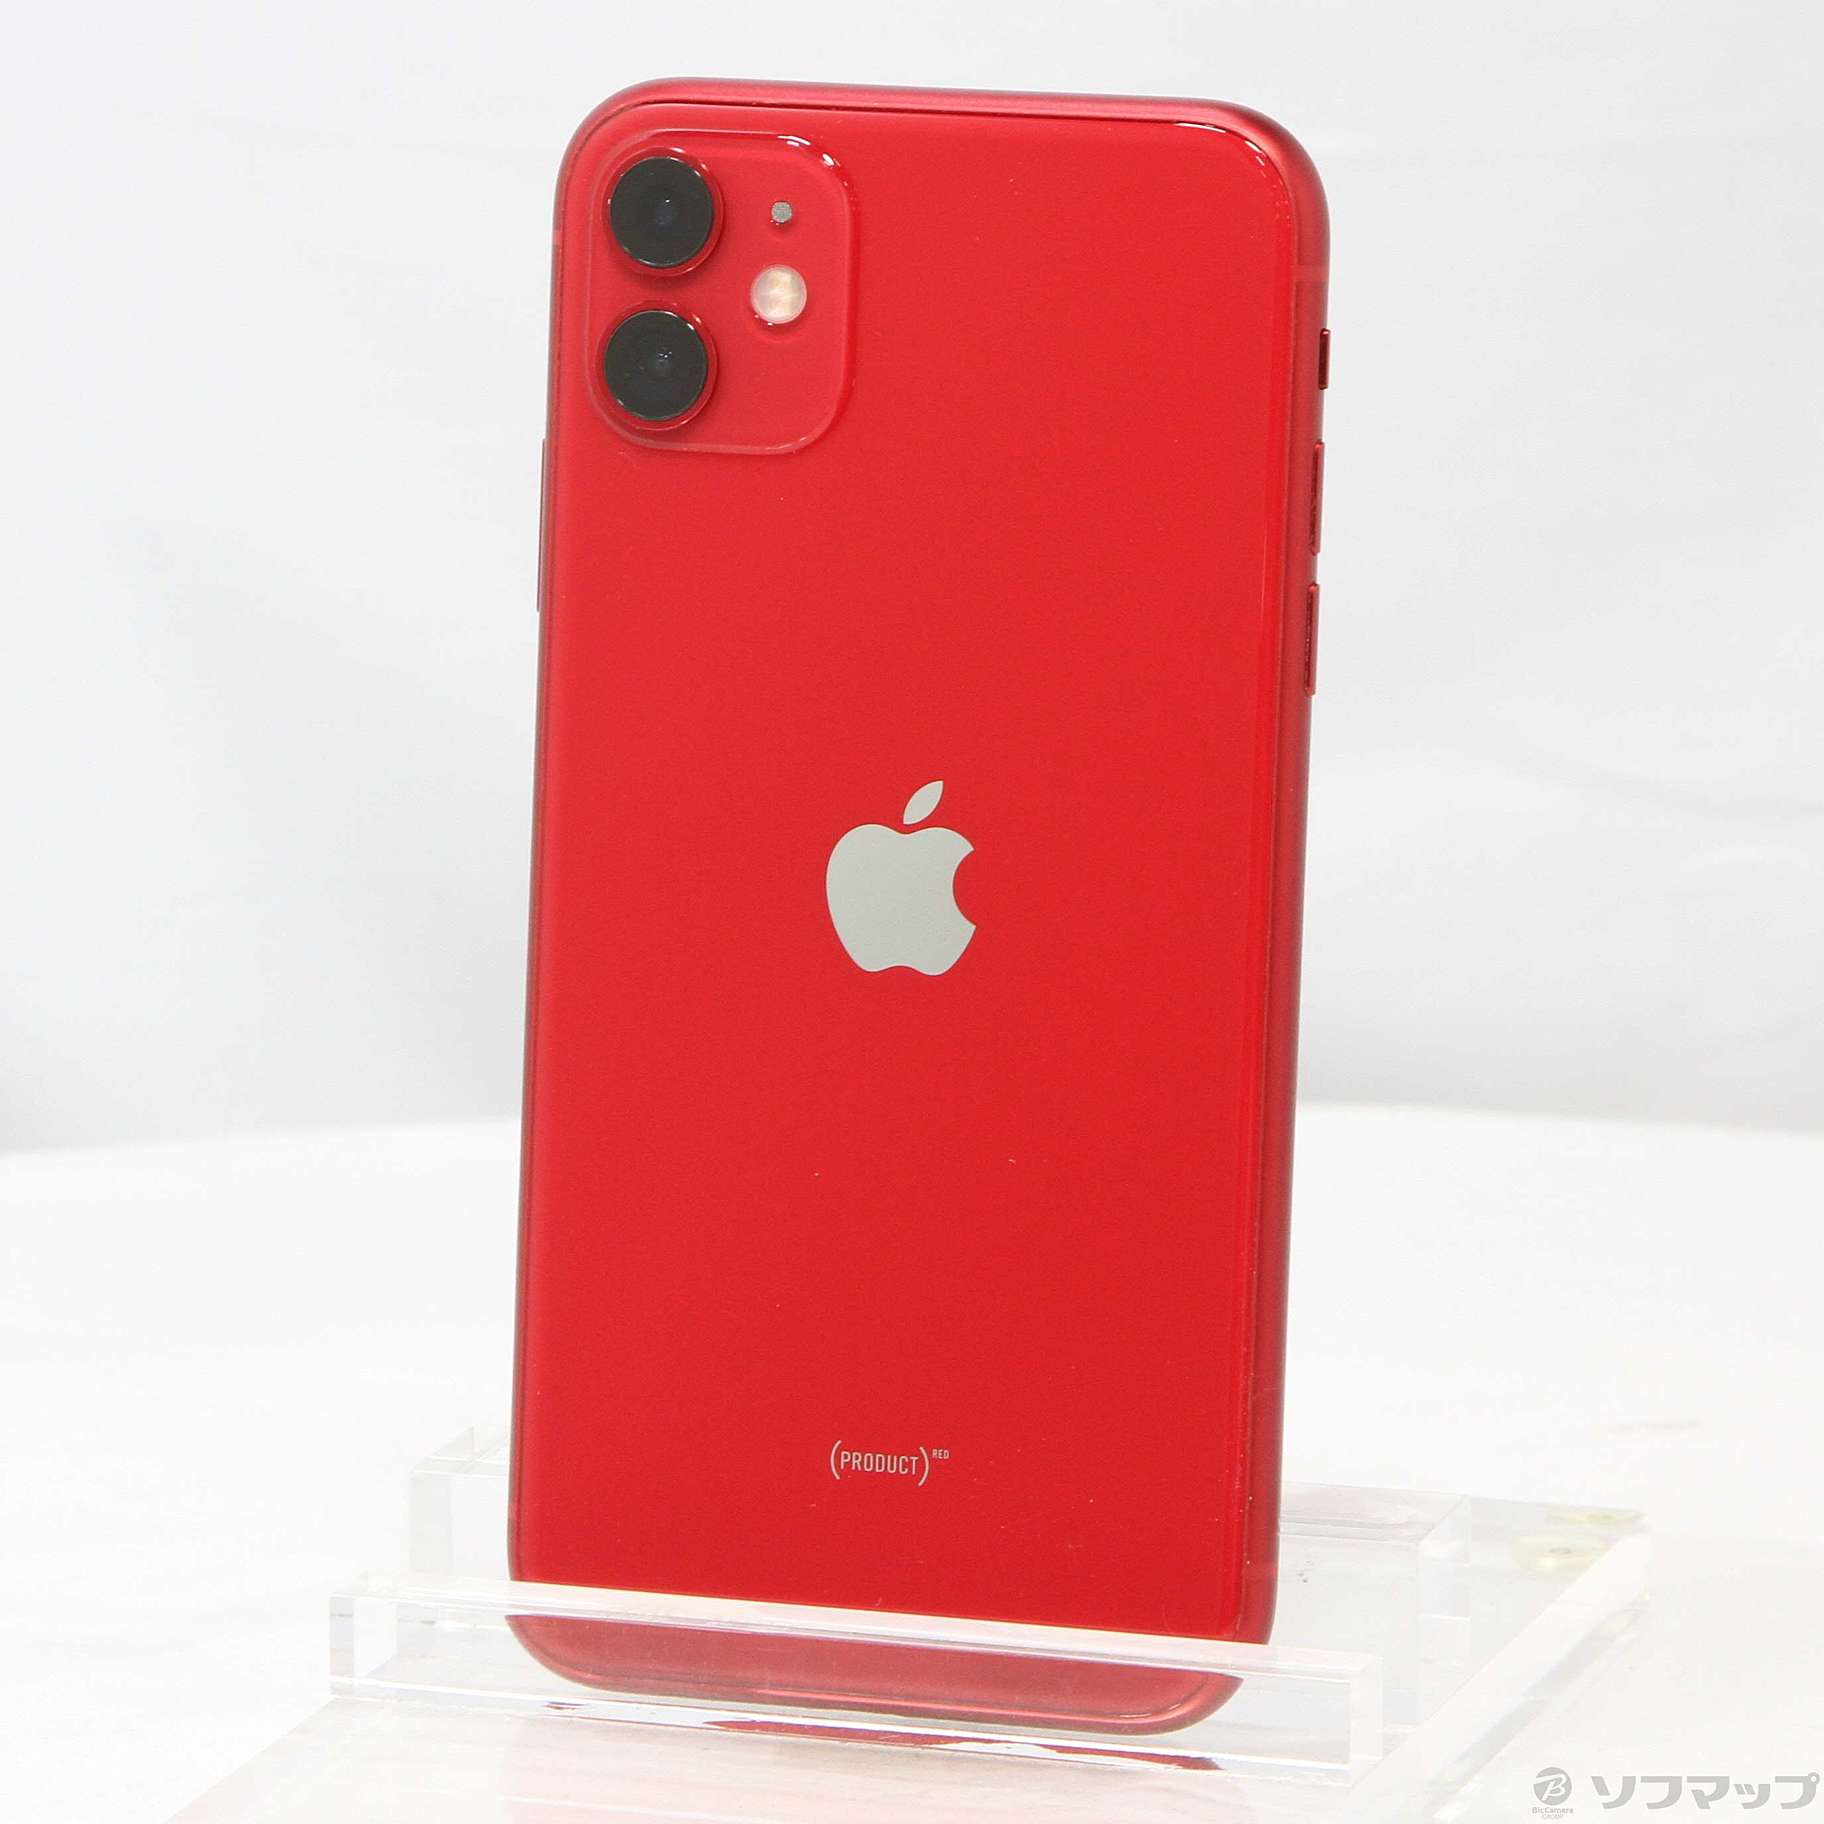 iPhone11 product red 128GB SIMフリー ジャンク